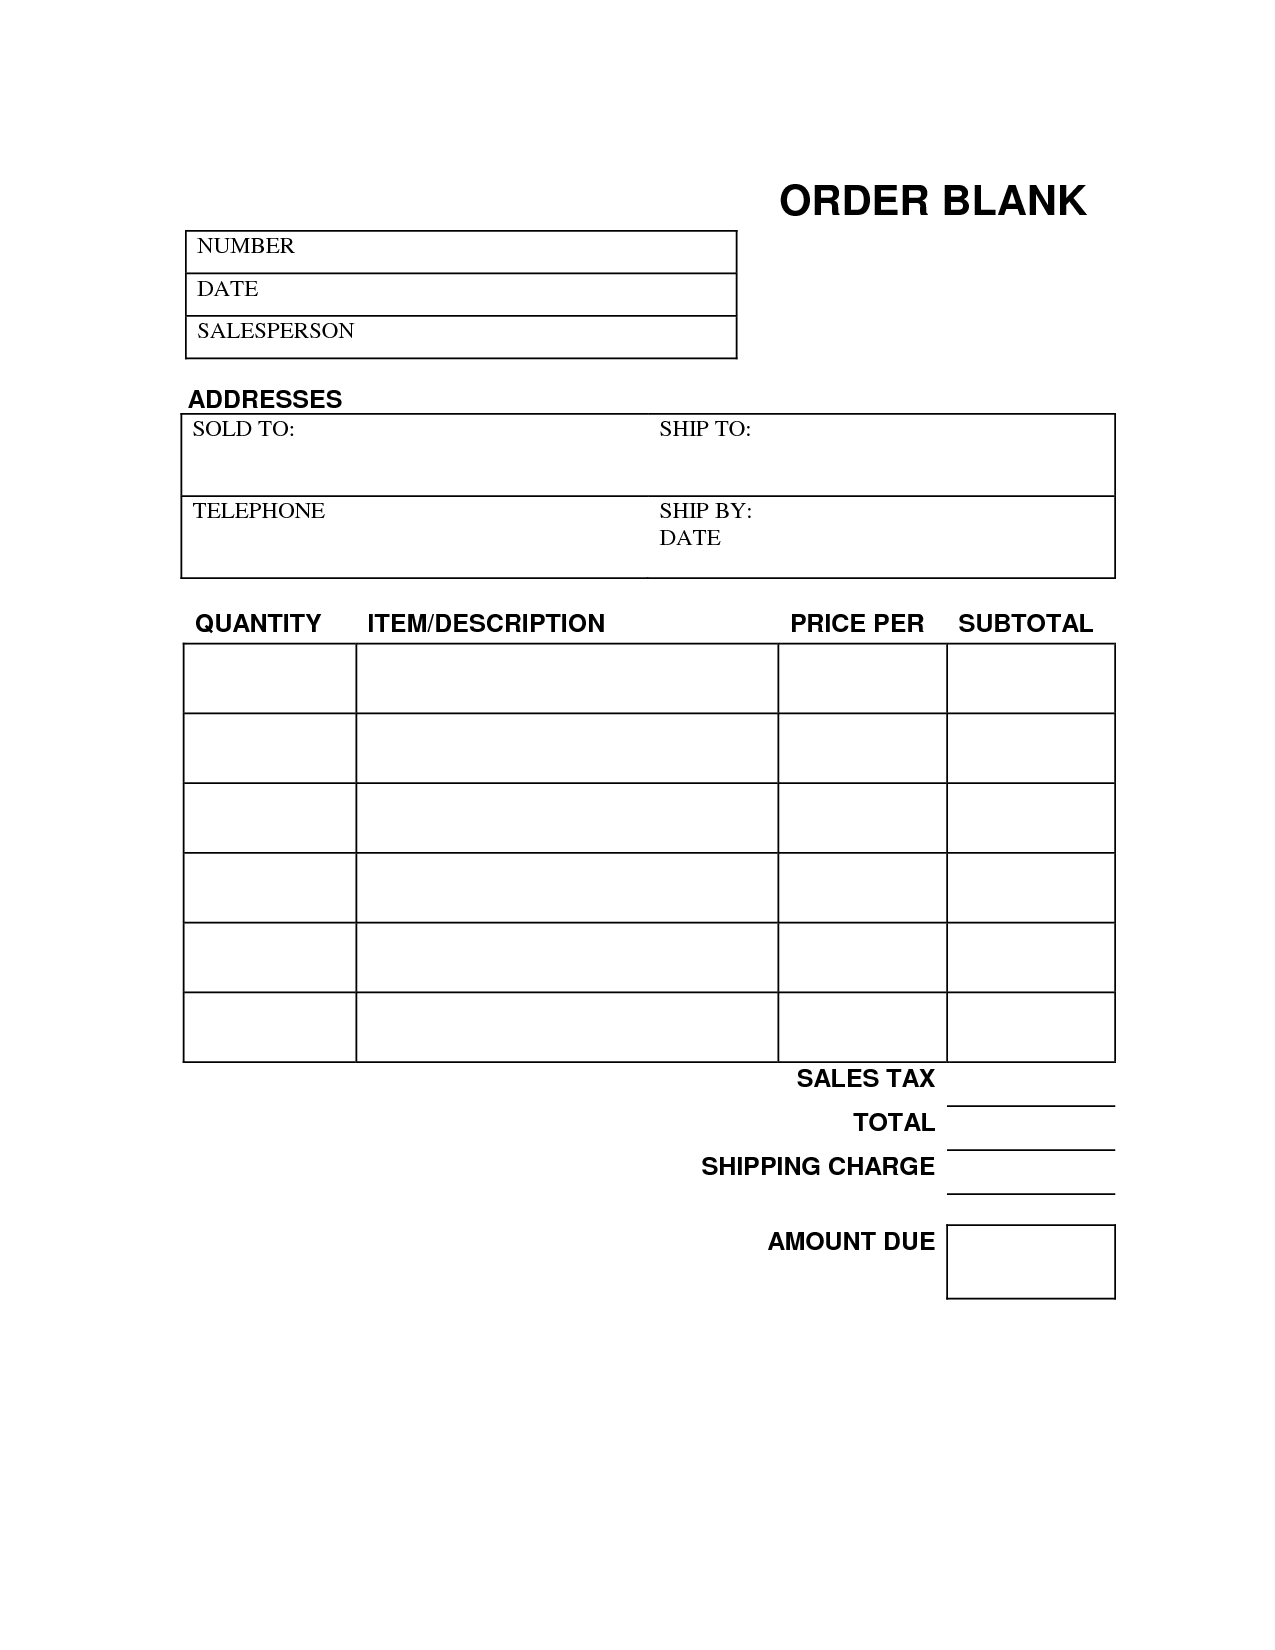 free work order forms printable   April.onthemarch.co